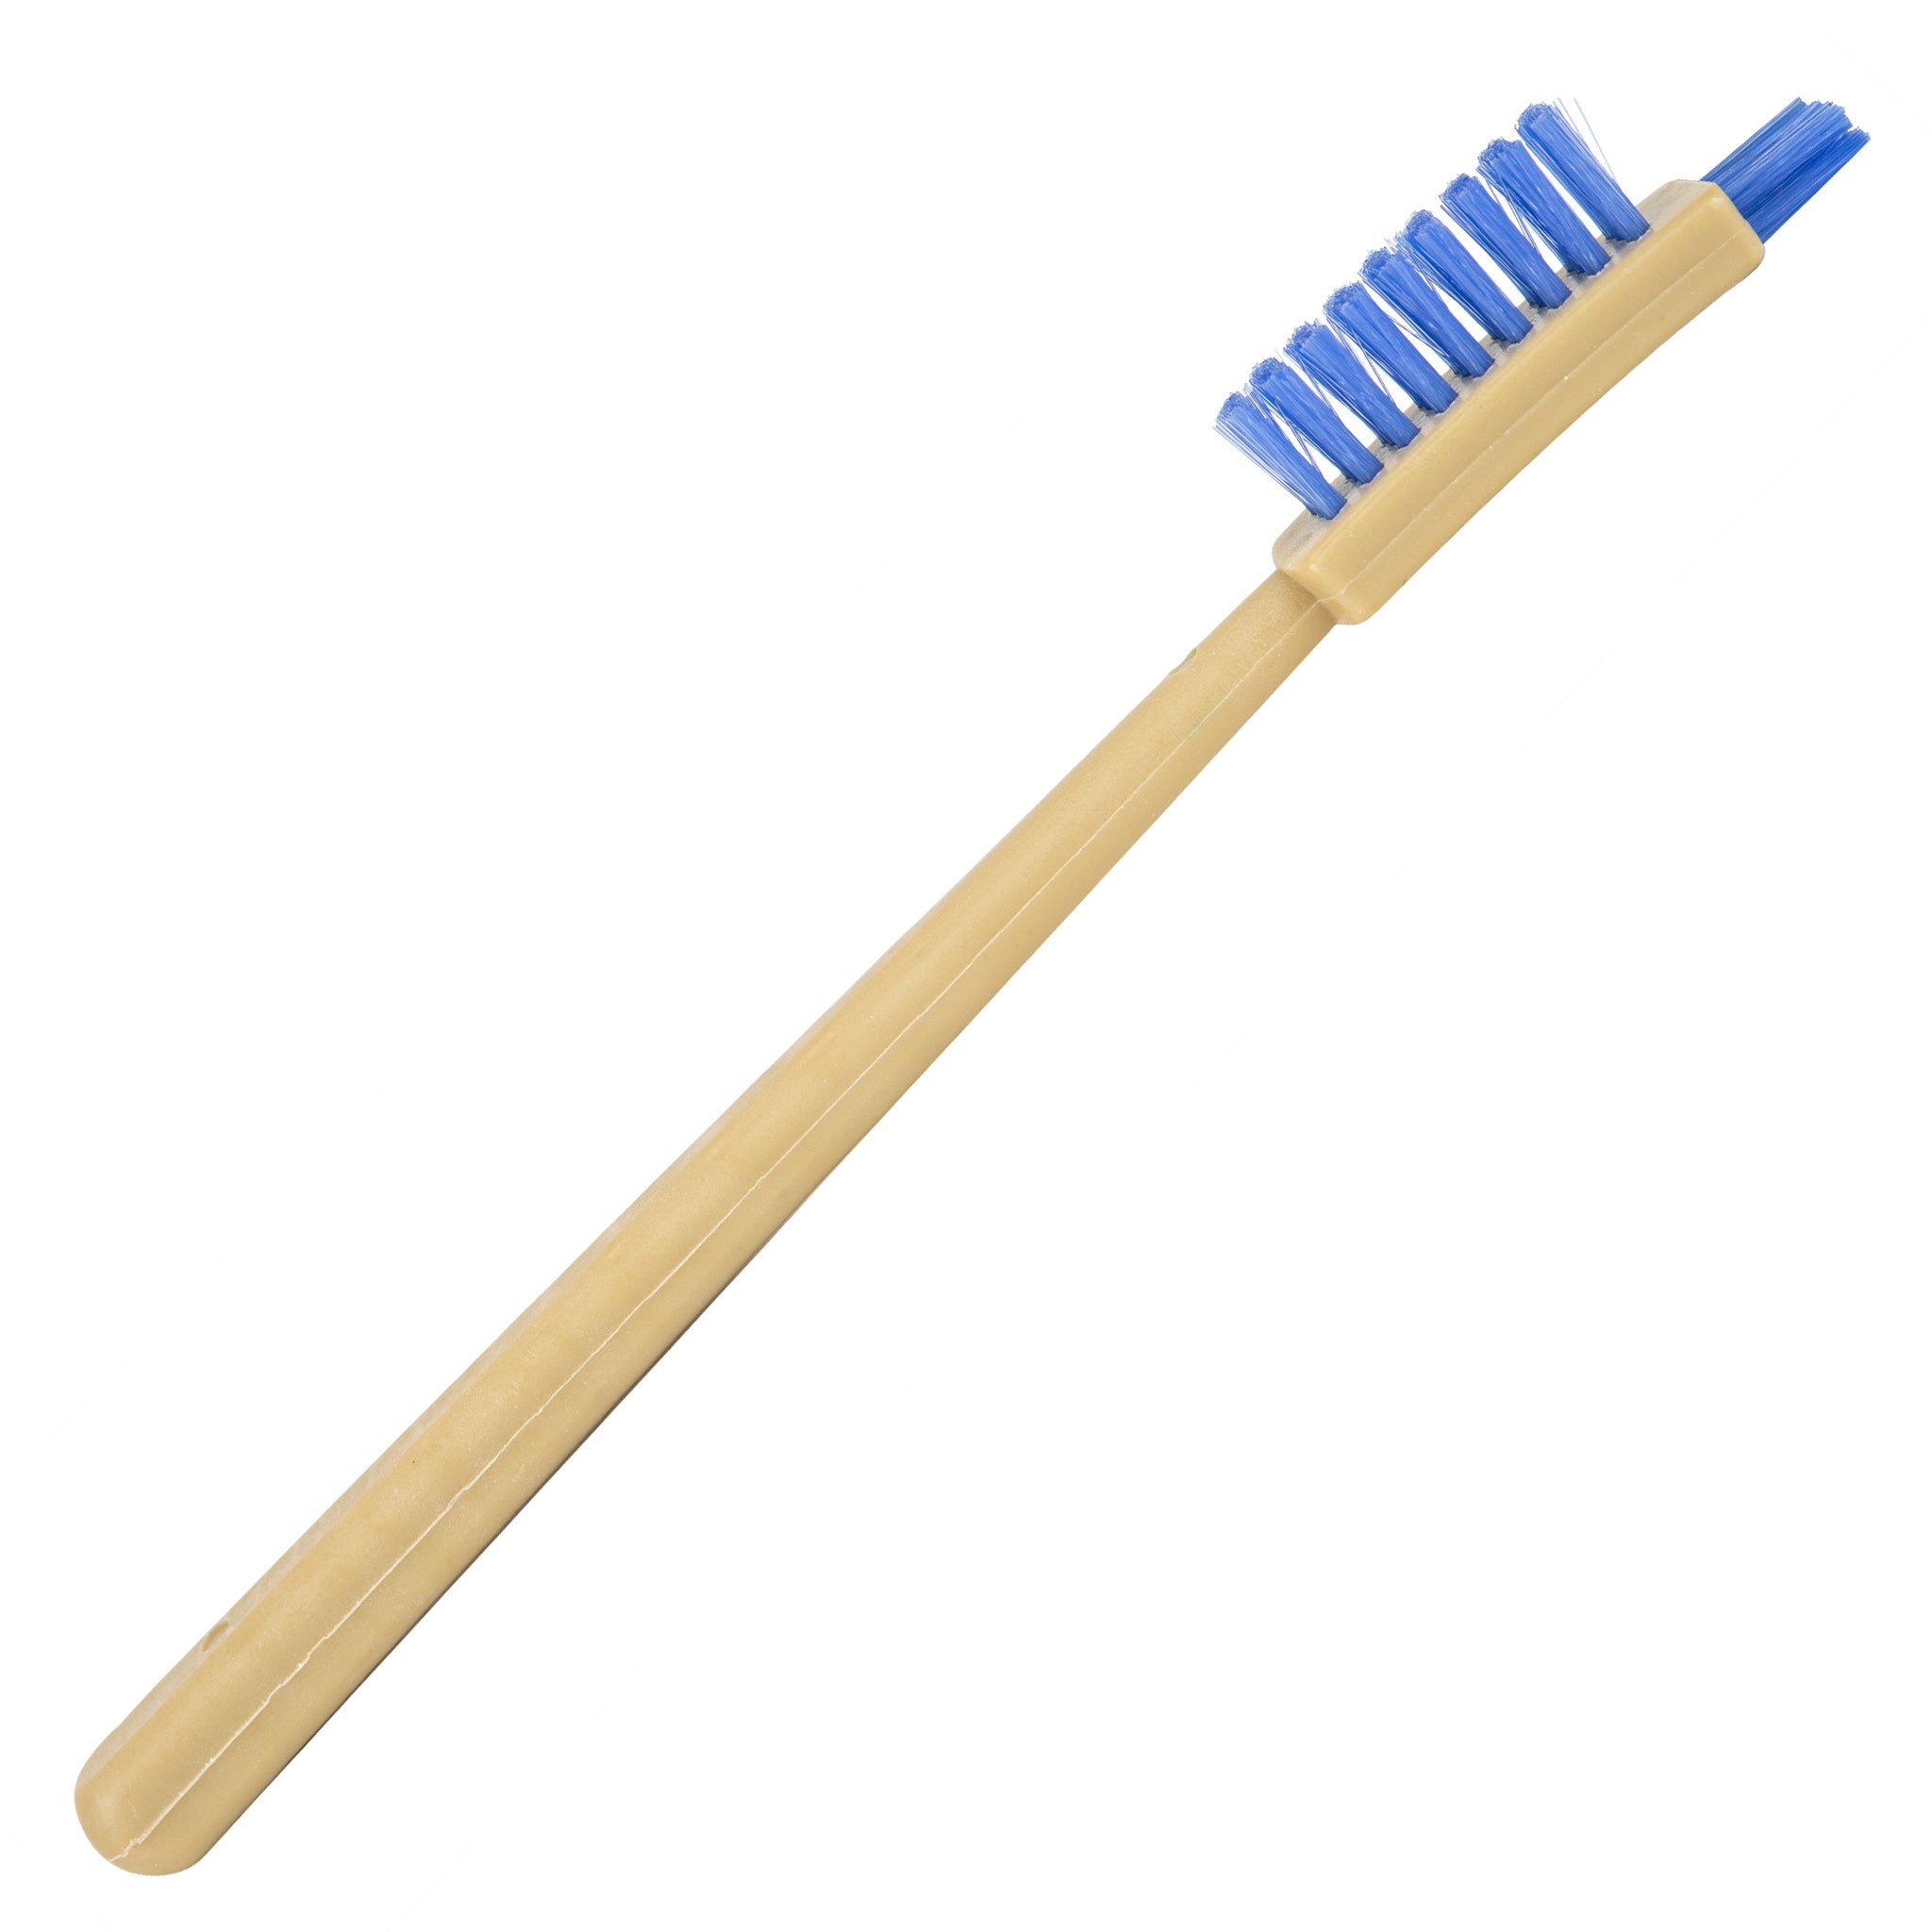 Cleaning brush for the Soyabella®.